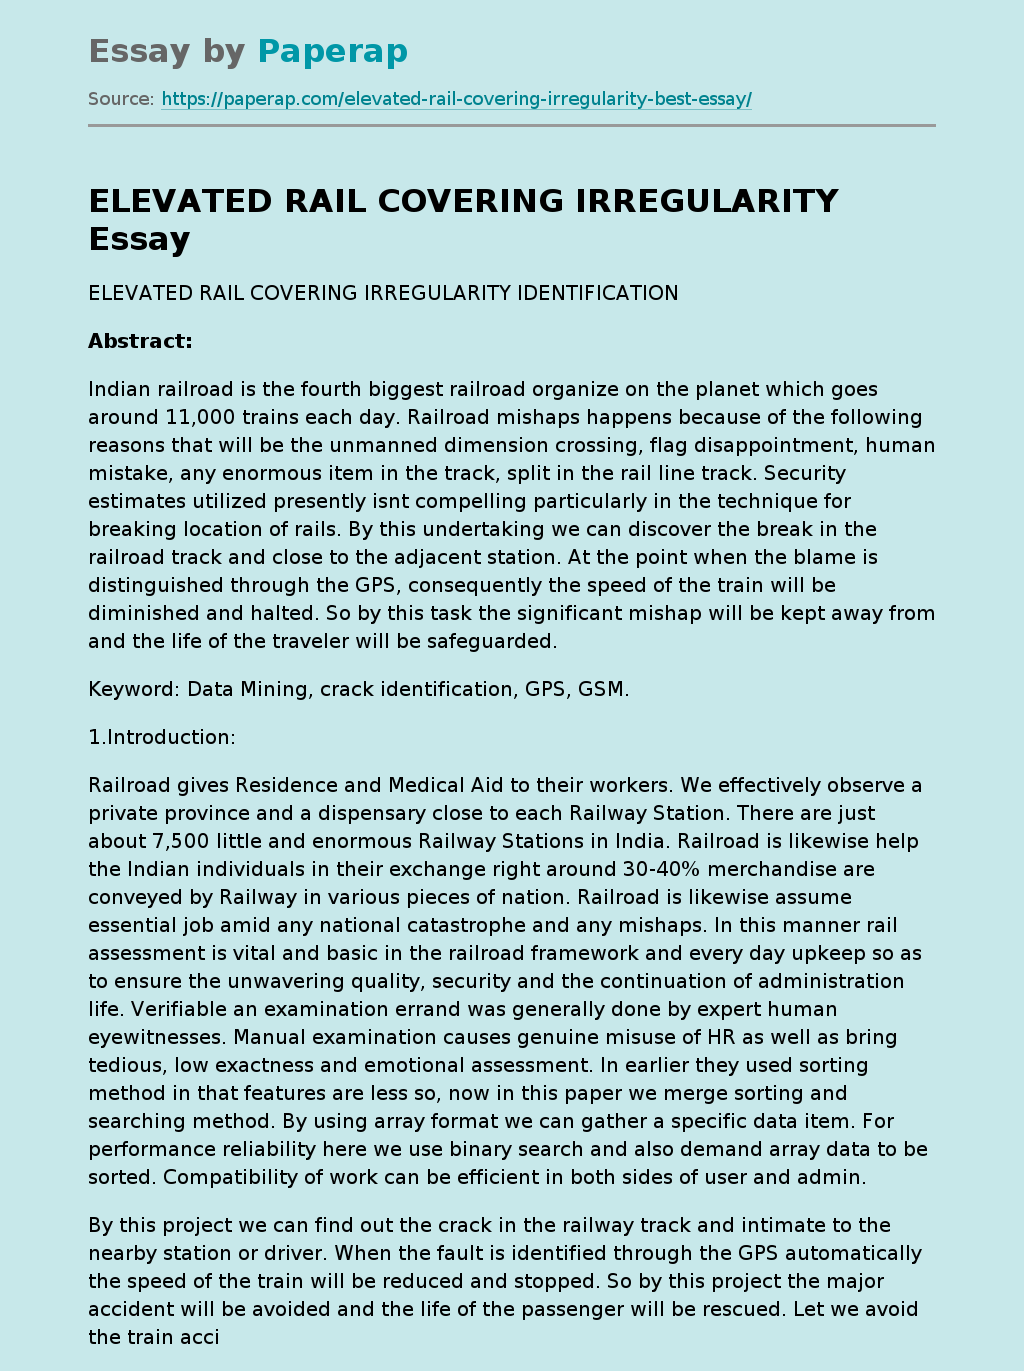 ELEVATED RAIL COVERING IRREGULARITY